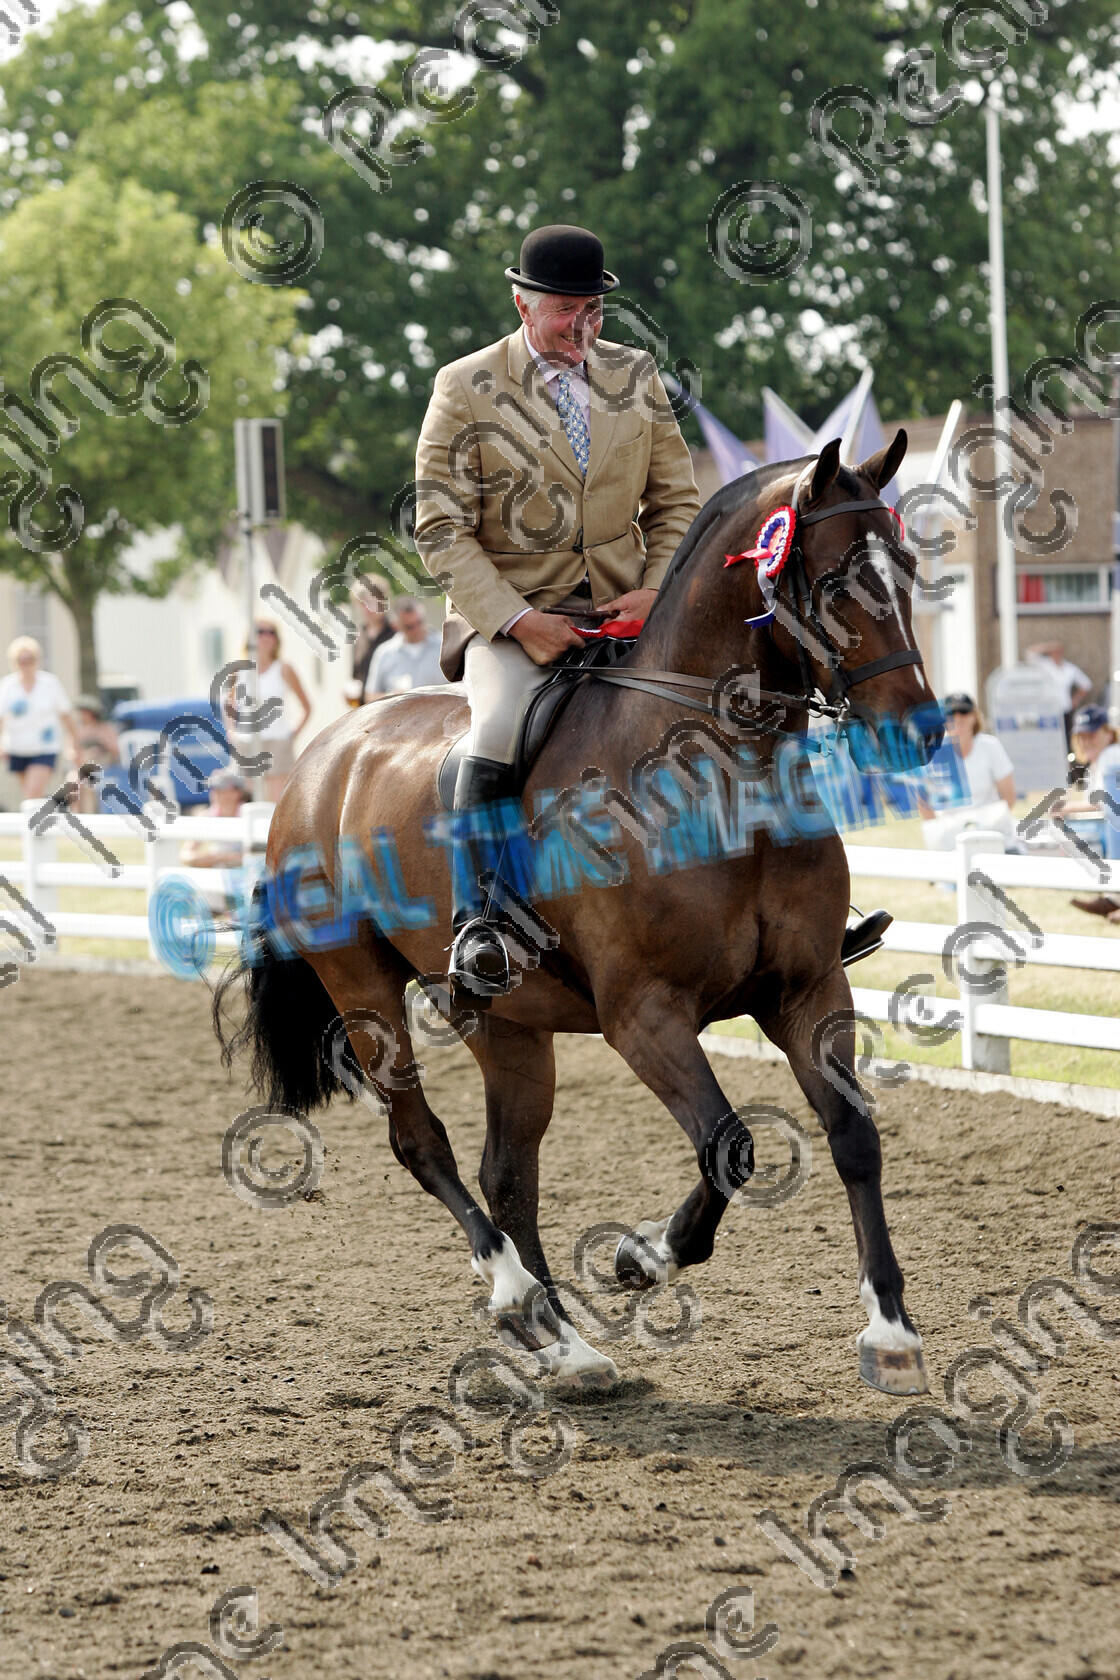 S06-32-8-130 copy 
 Keywords: The Royal Show rosette rosettes prize winner horse pony show showing Tuesday 4 July 2006 canter cantering action championship champion ridden mounted 402 The Duke ridden by Robert Oliver,
Mrs S Cuddy Lightweight Riding Cob bay gelding